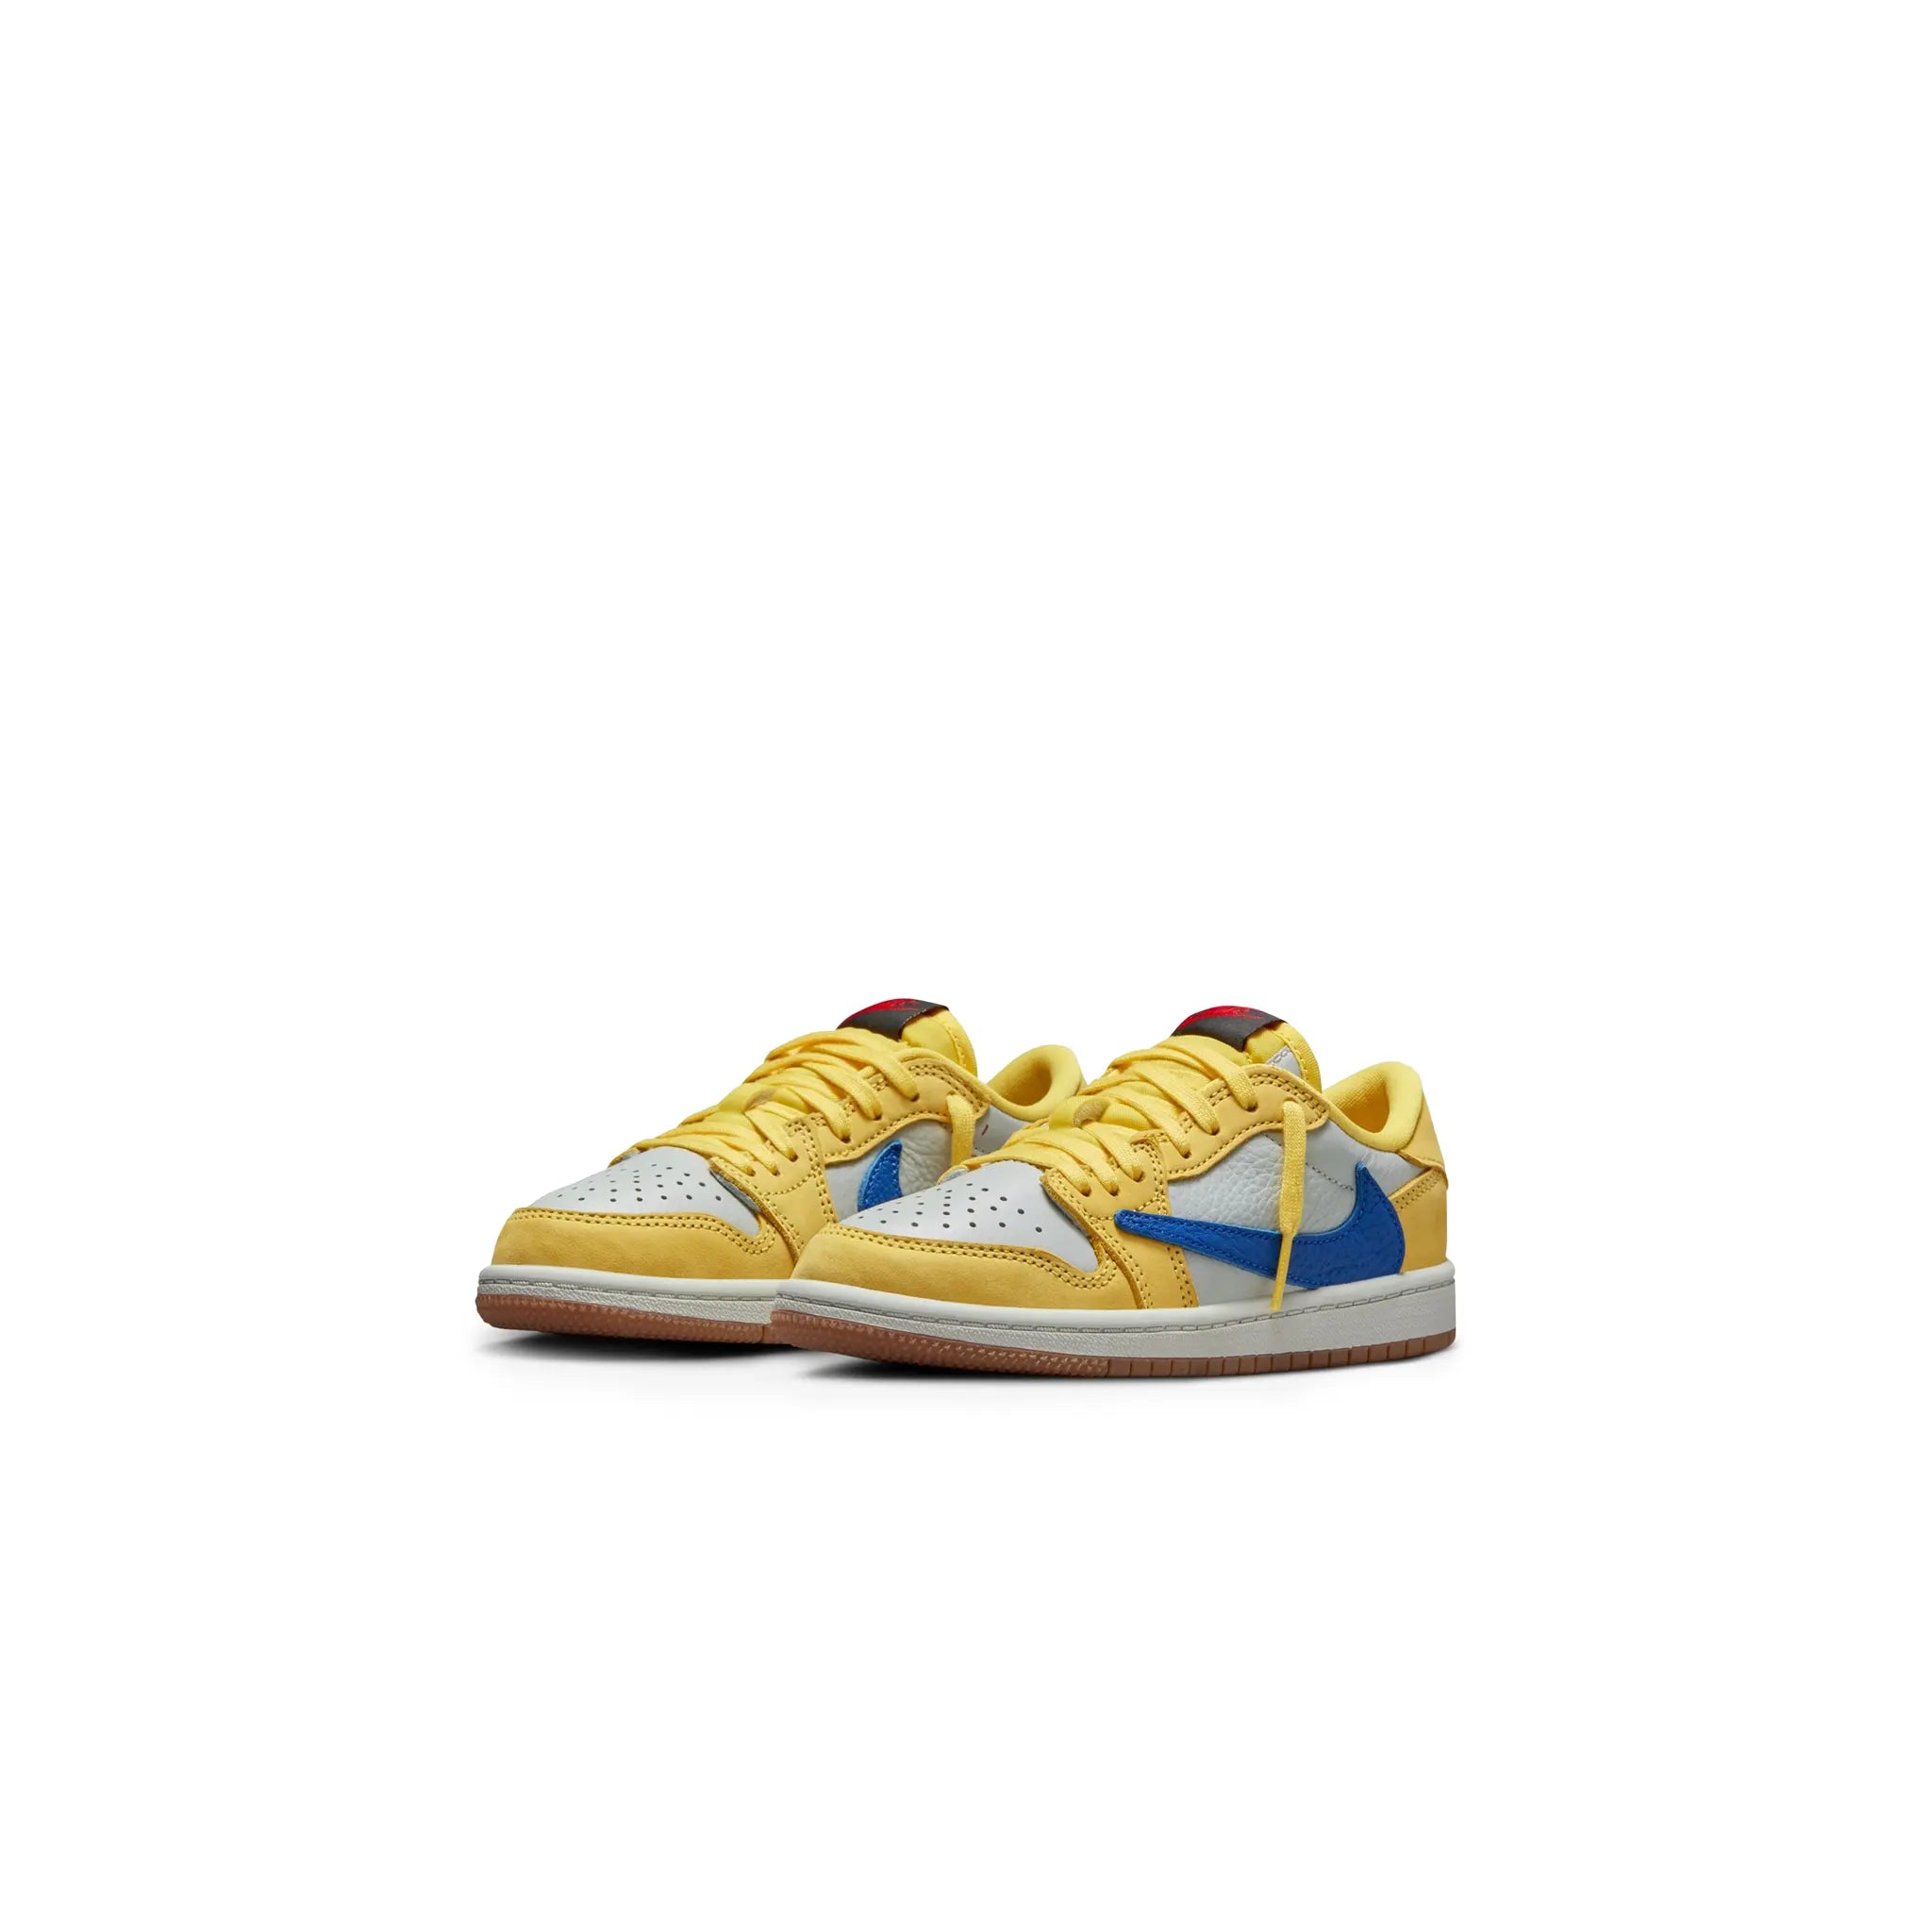 Front side View of travis scott x air jordan 1 low canary ps dz5909-700